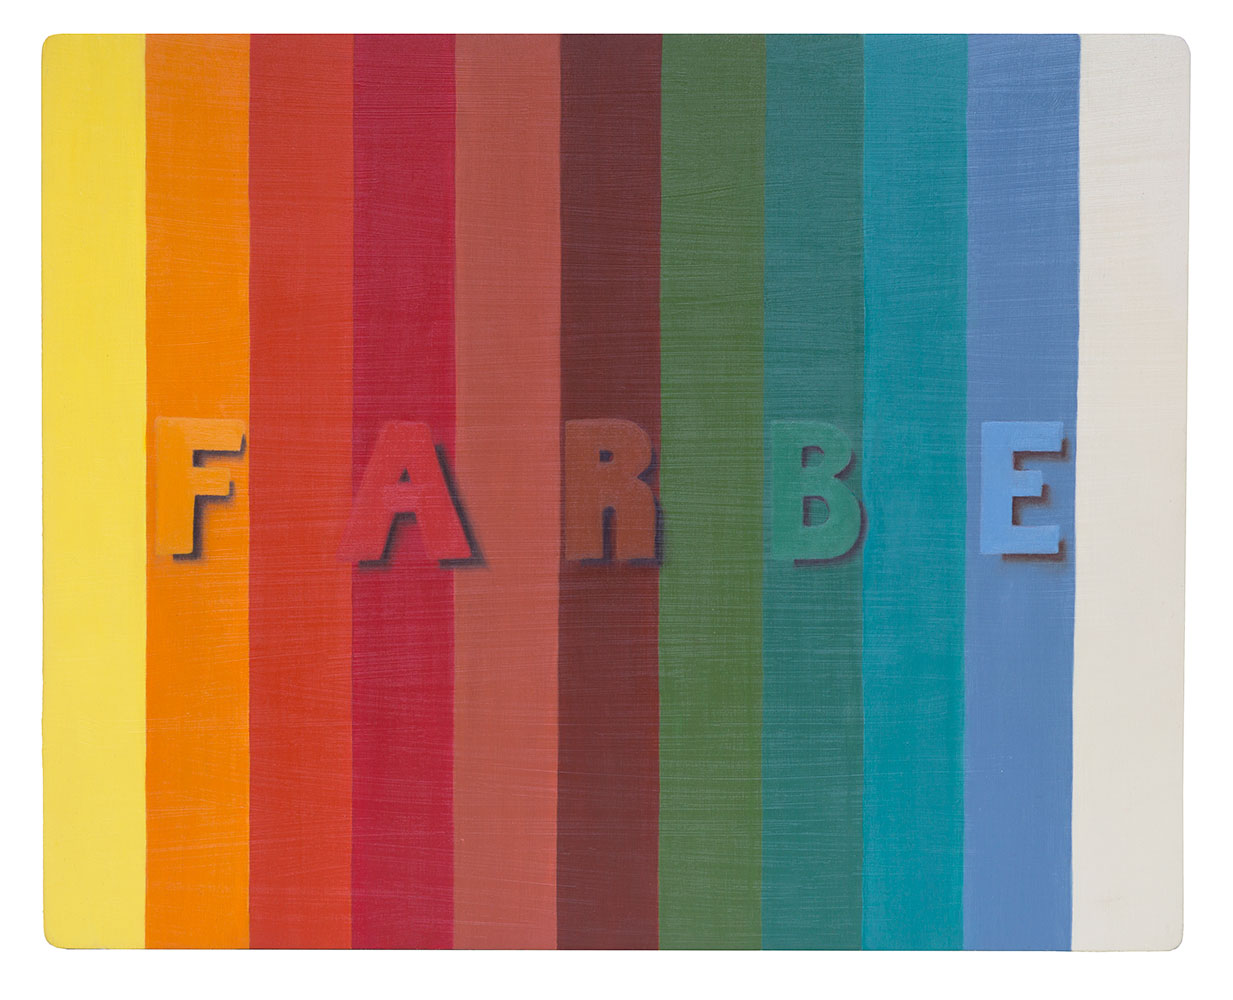 oil colour on wood 'Farbe ' Angelika Hasse contemporary text based art